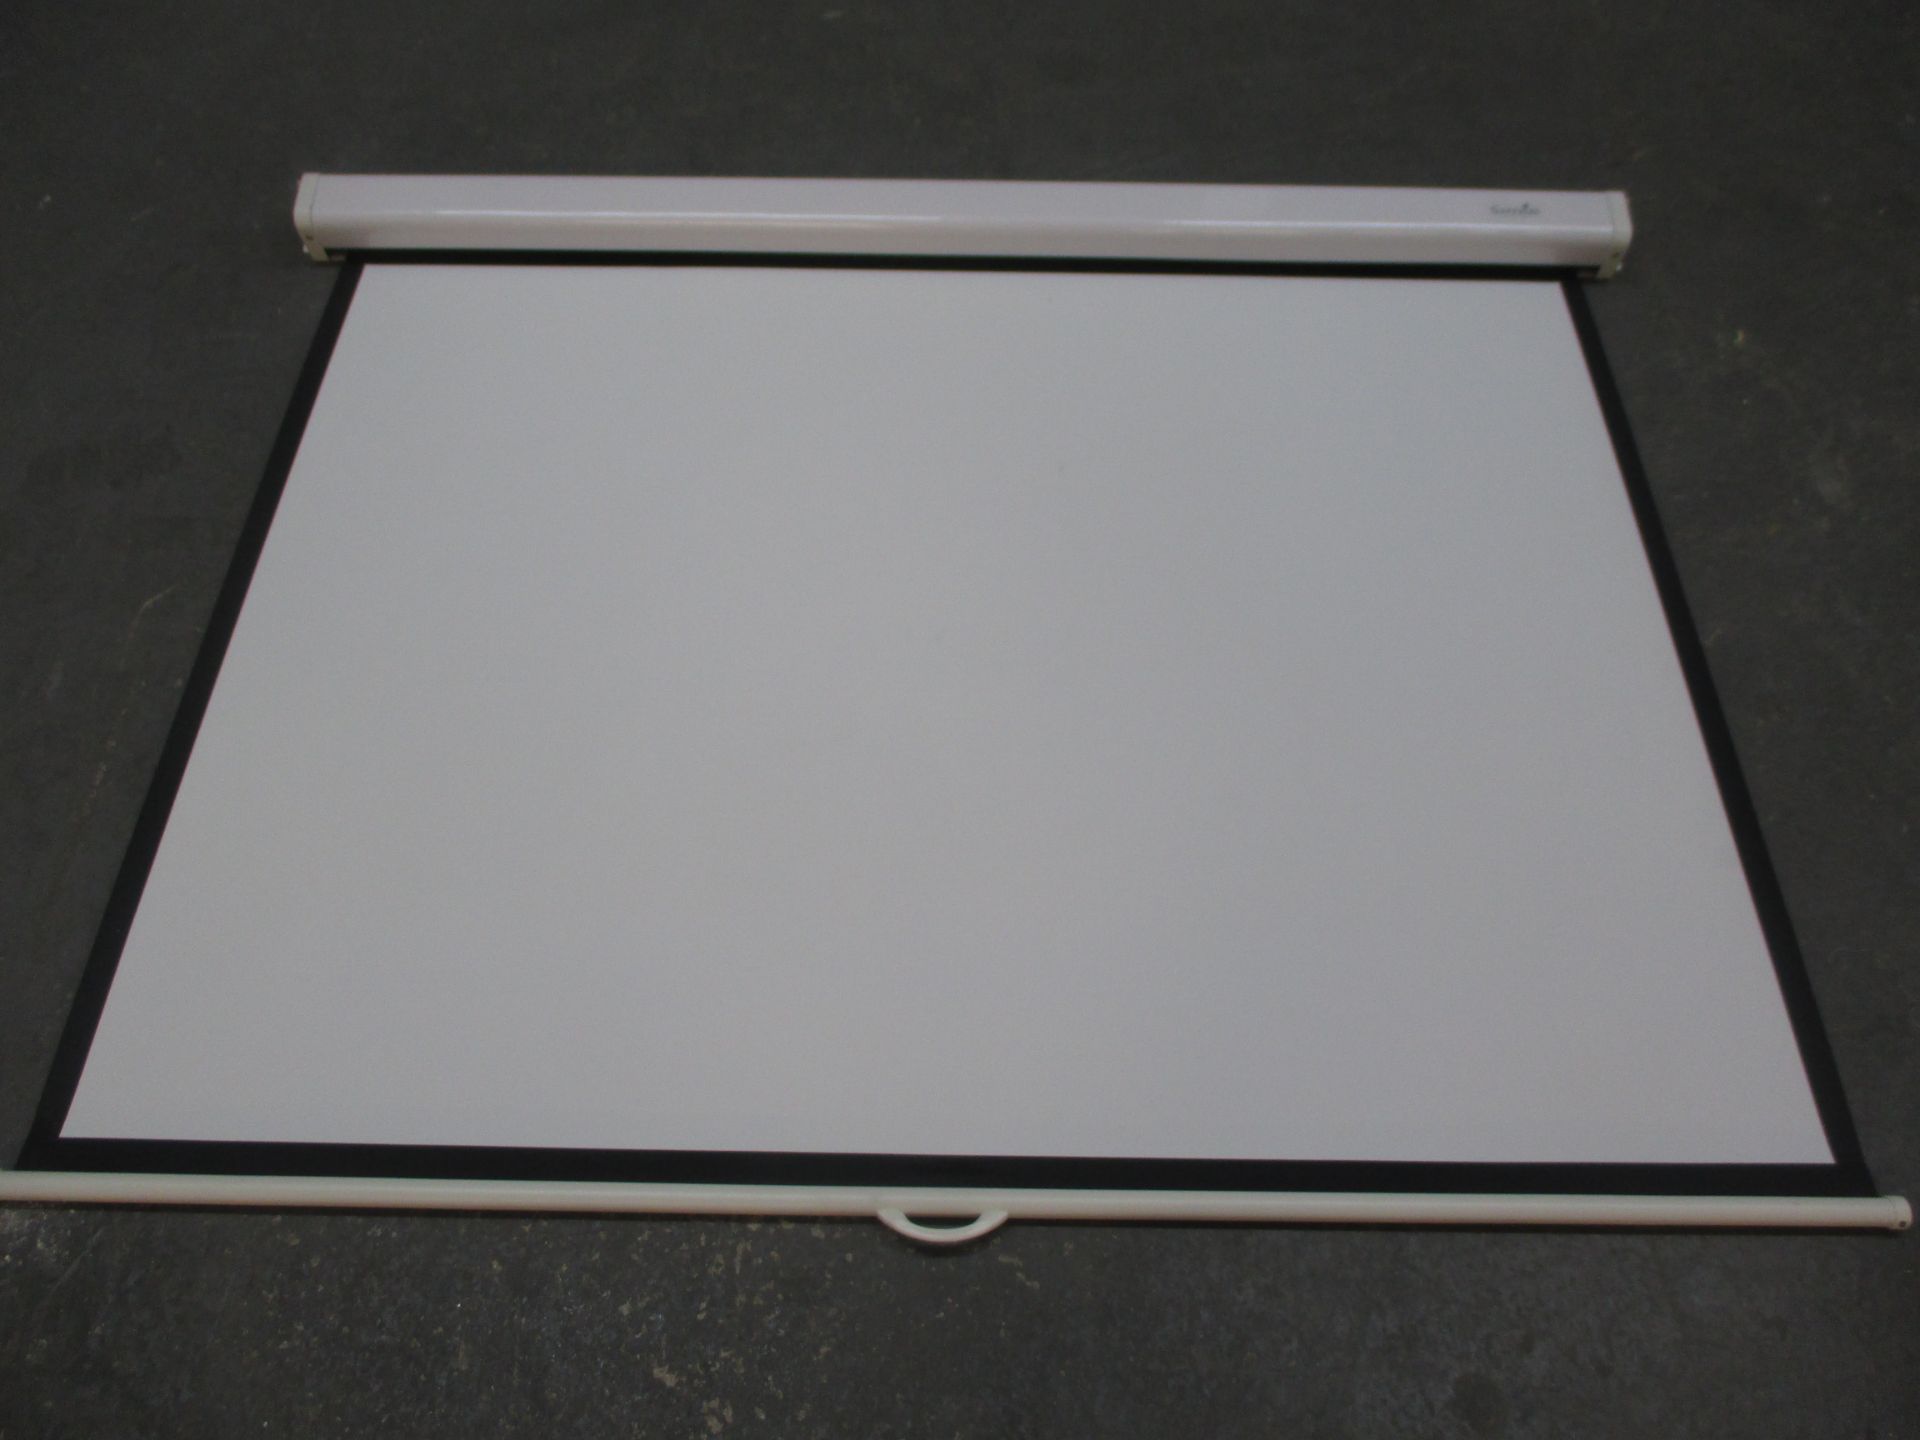 Sapphire Good Quality Projection Display Screen size 6 foot Diagonal with mounting brackets